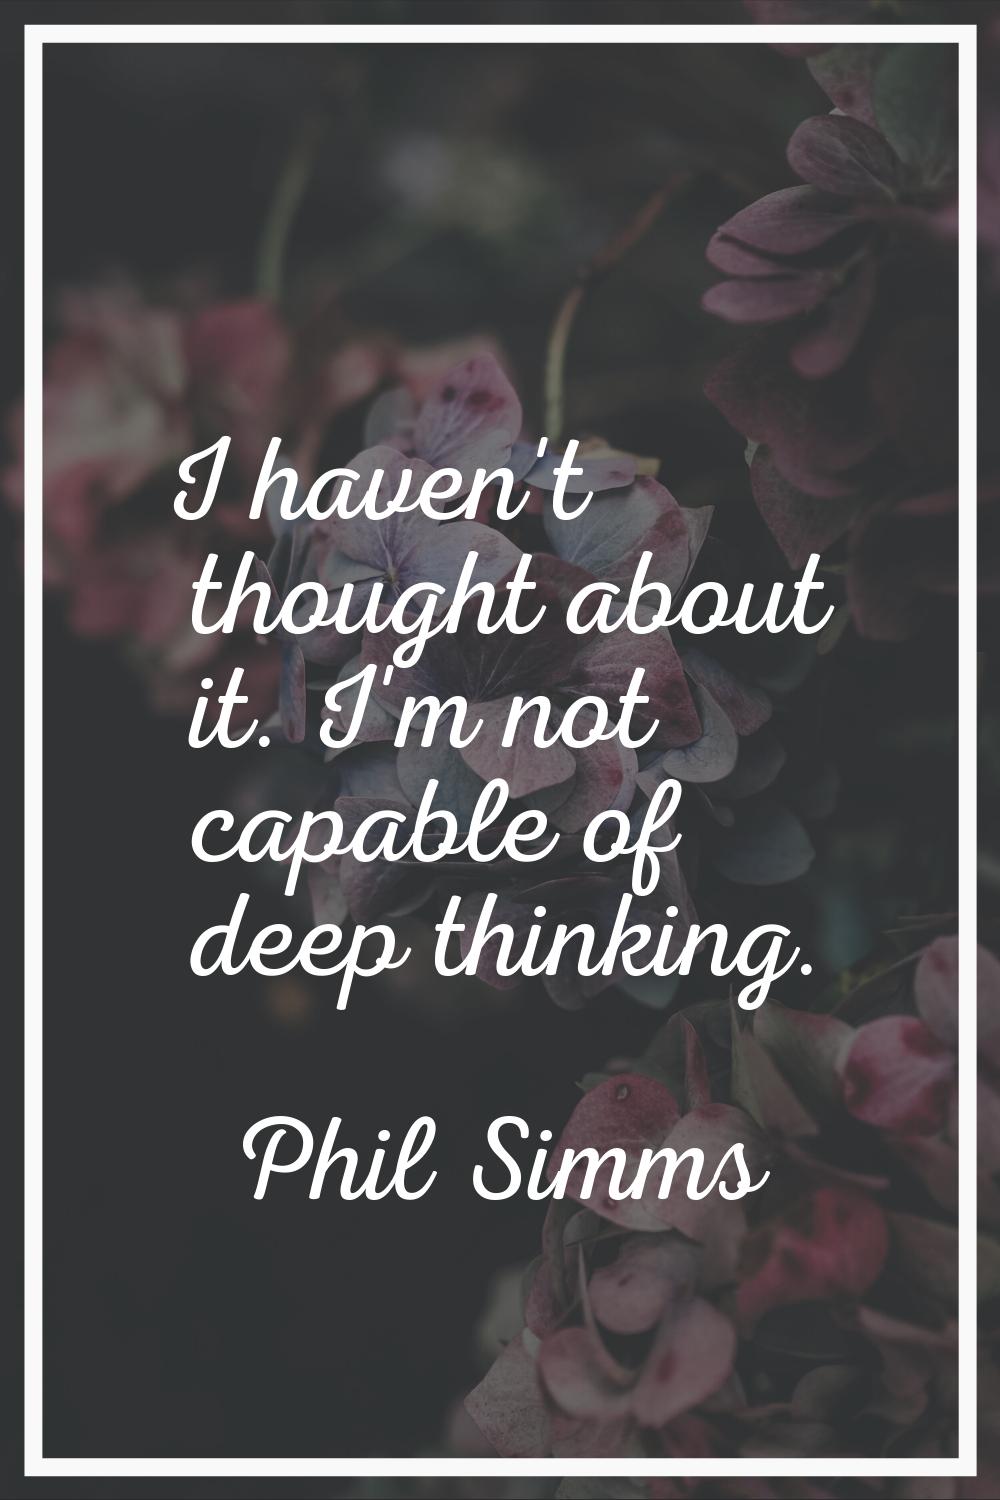 I haven't thought about it. I'm not capable of deep thinking.